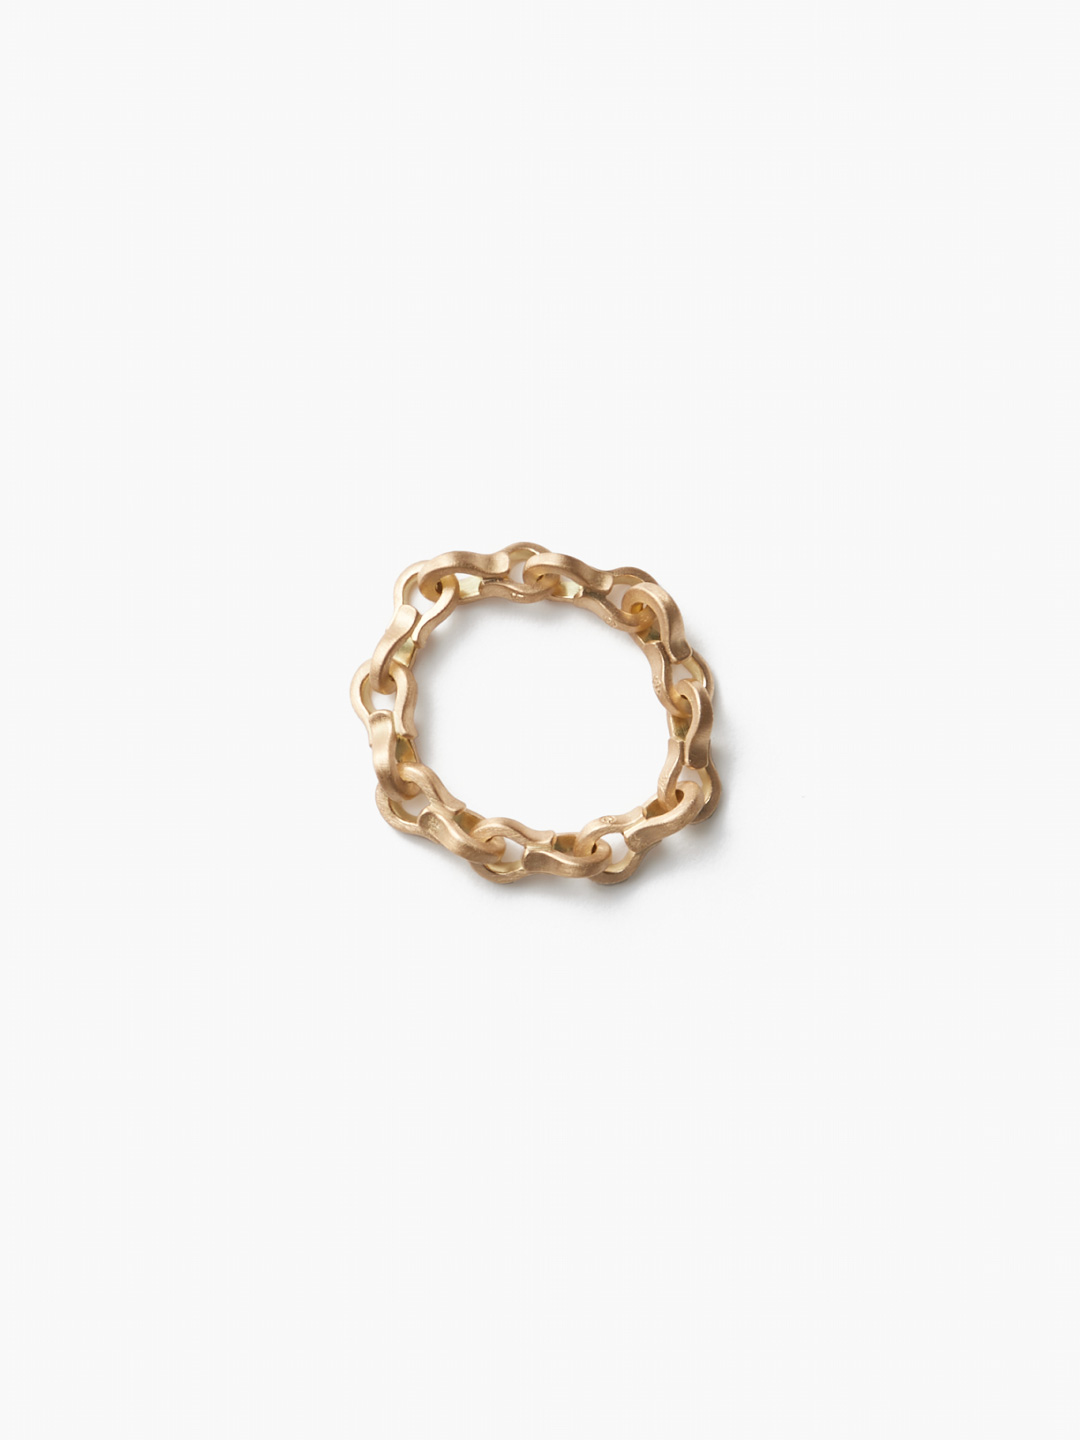 The Symbol Of Refined Metal Ring #4 - Yellow Gold